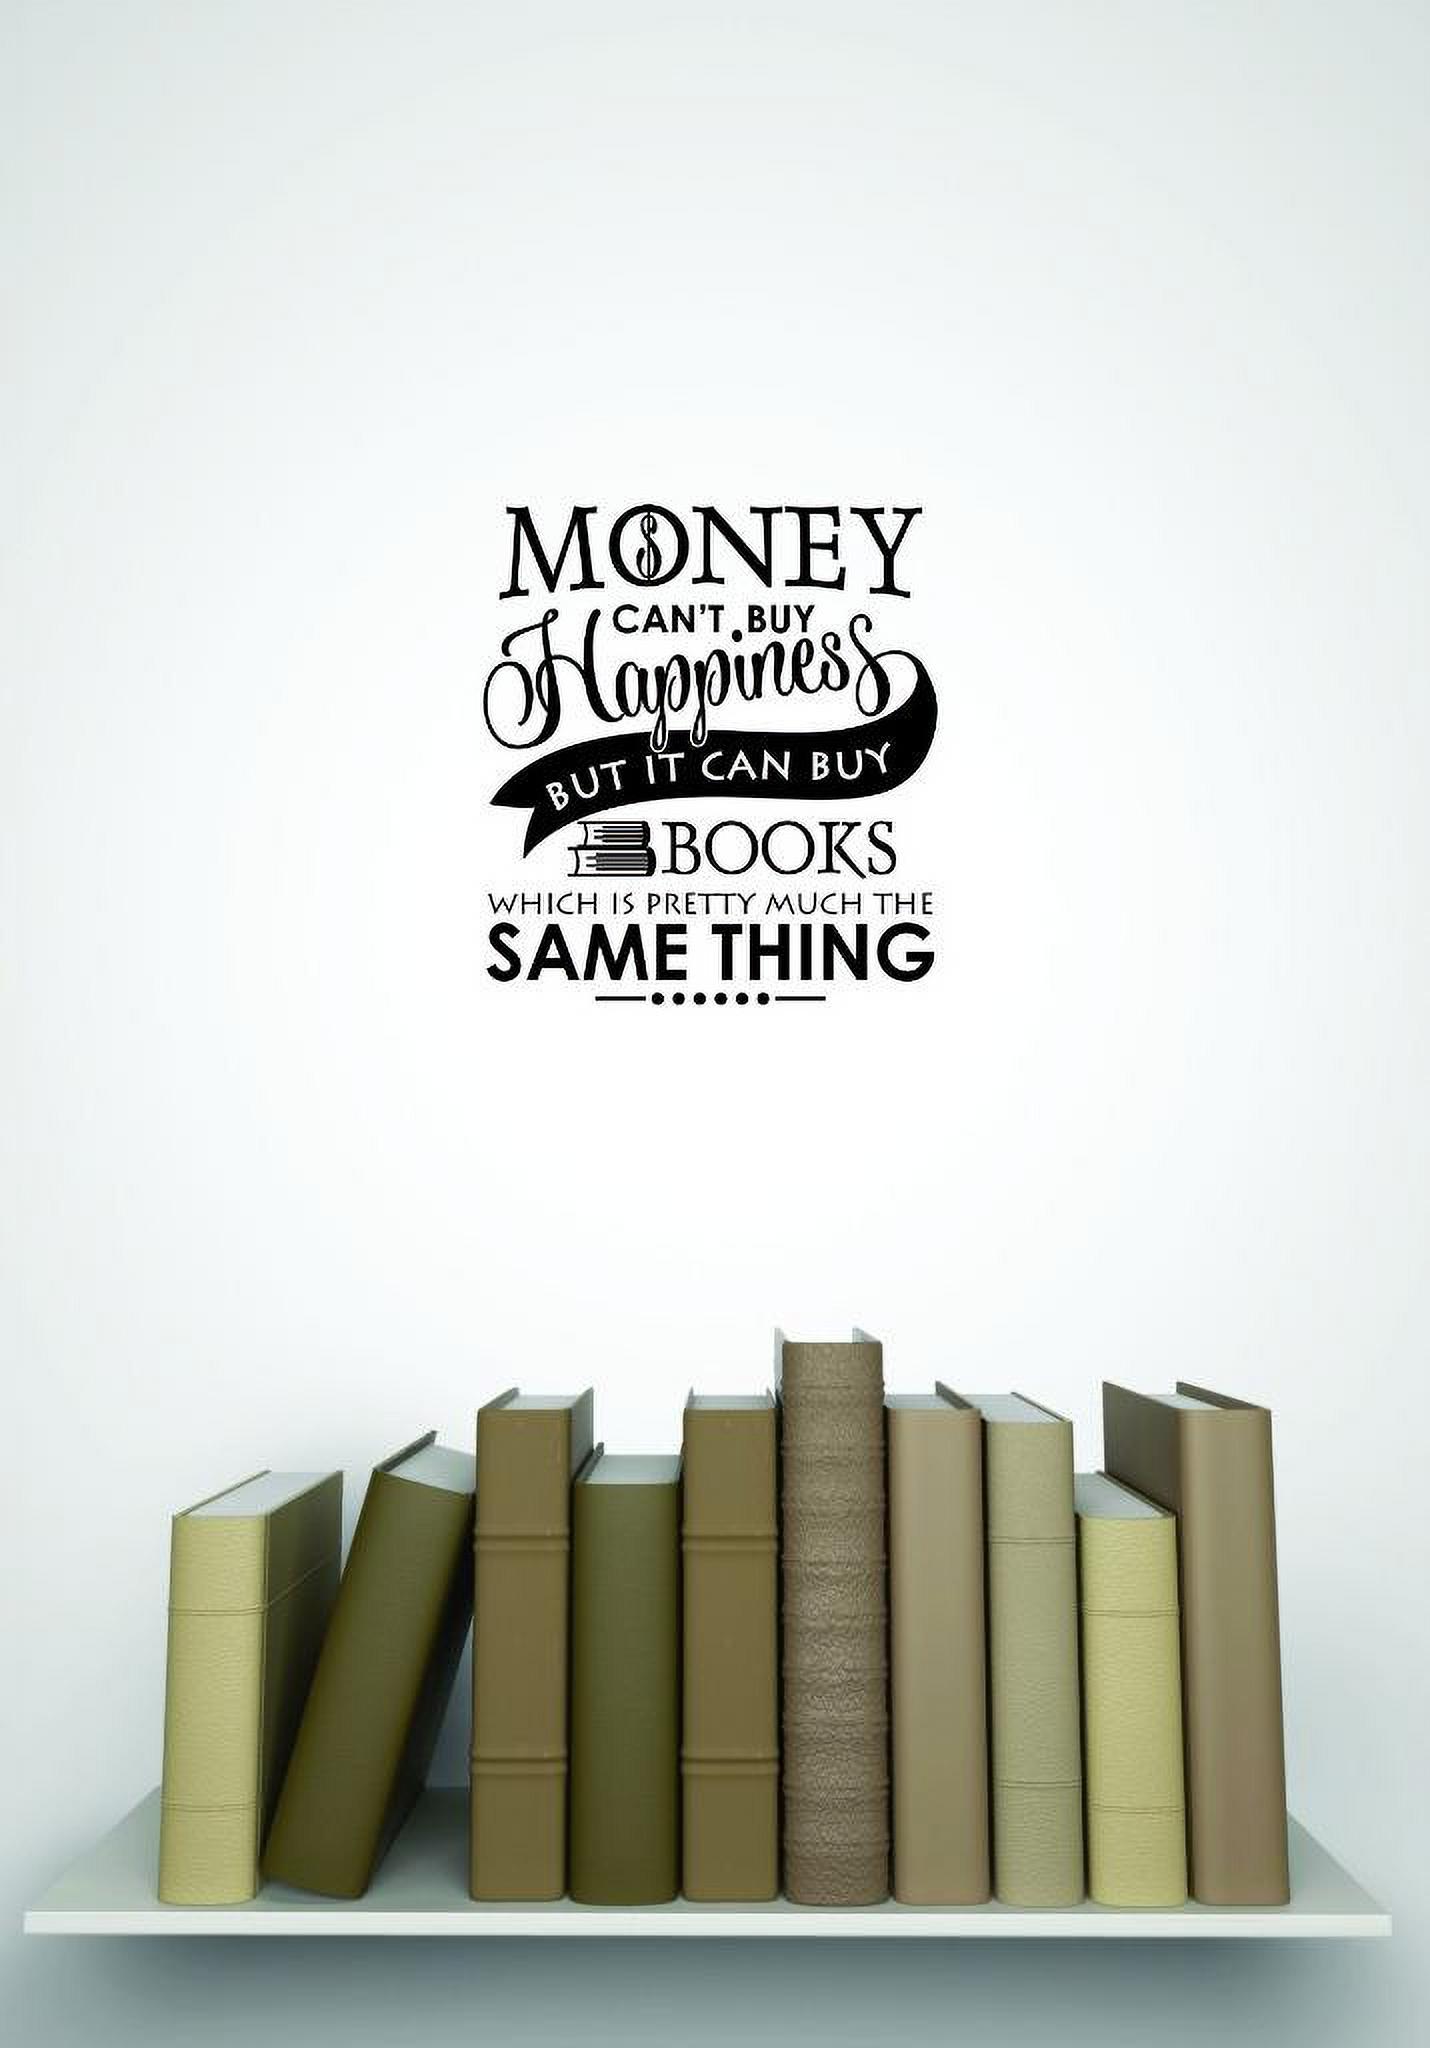 Custom Wall Decal - Money Cant Buy Happiness But It Can Buy Books Which Is Pretty Much The Same Thing Quote Home Decor 16x24" - image 1 of 1